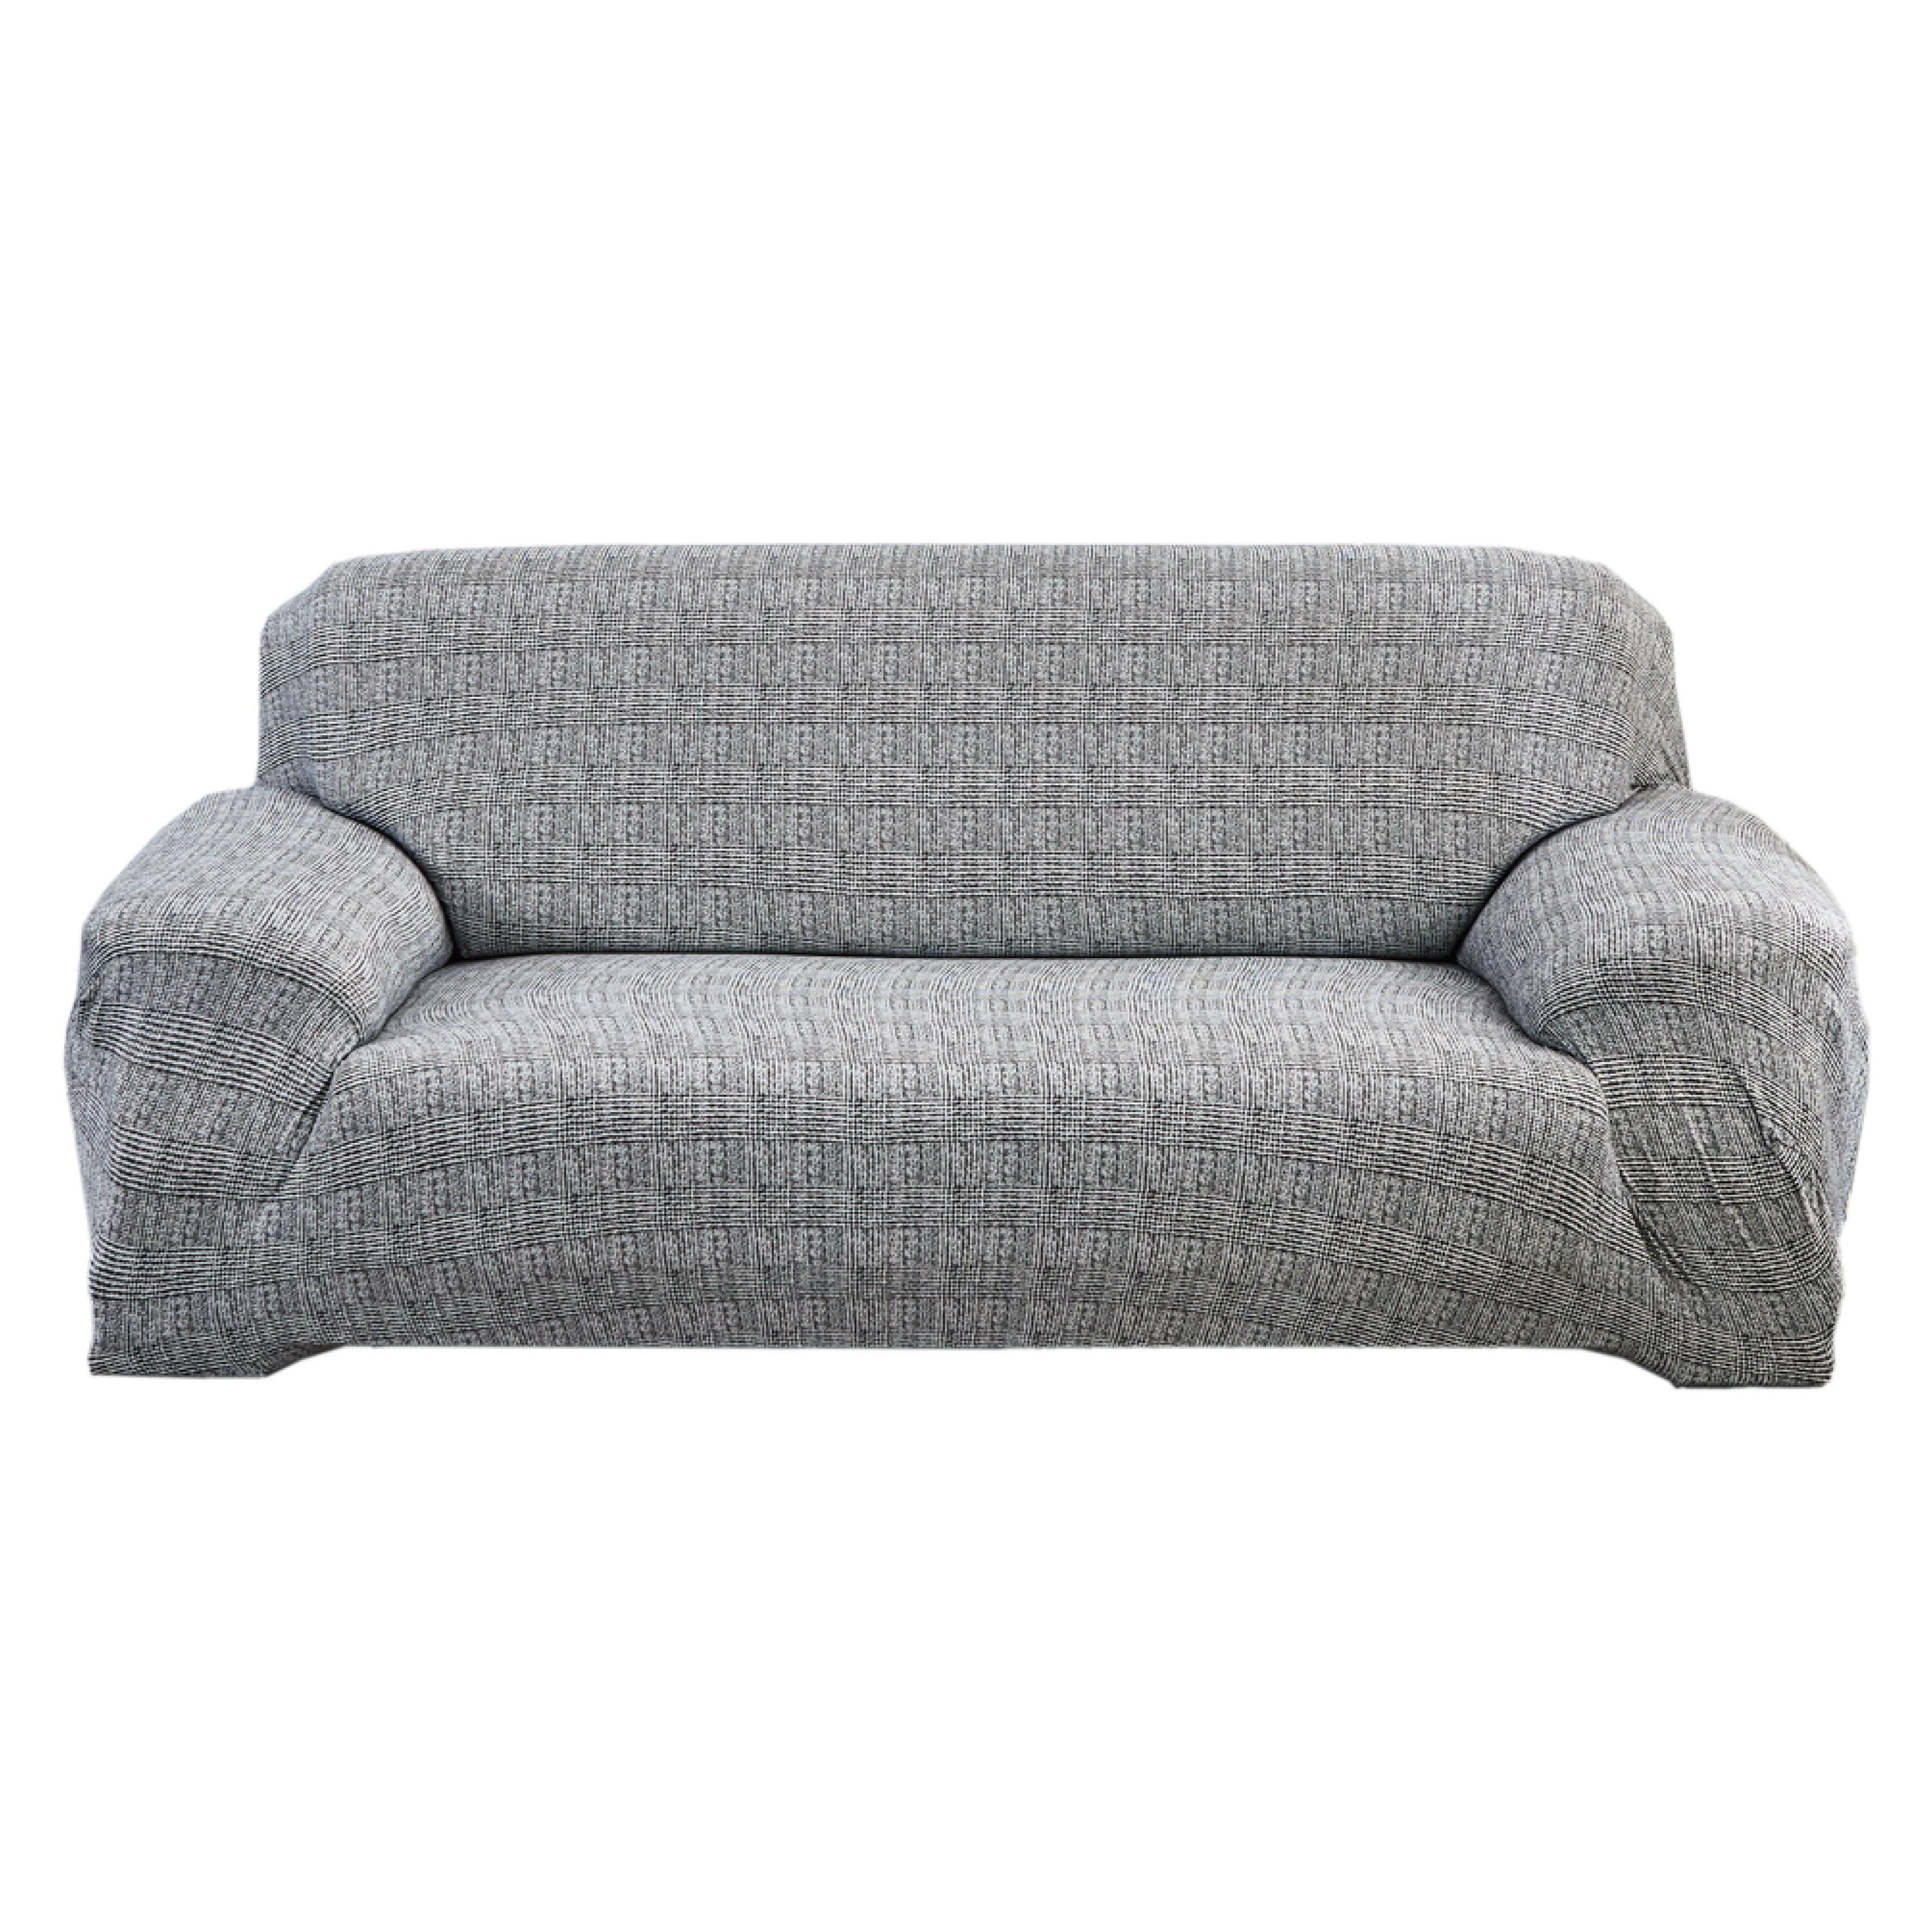 Hyper Cover Stretch Sofa Cover with Patterns Elegant Grey | Sofa Covers | Brilliant Home Living